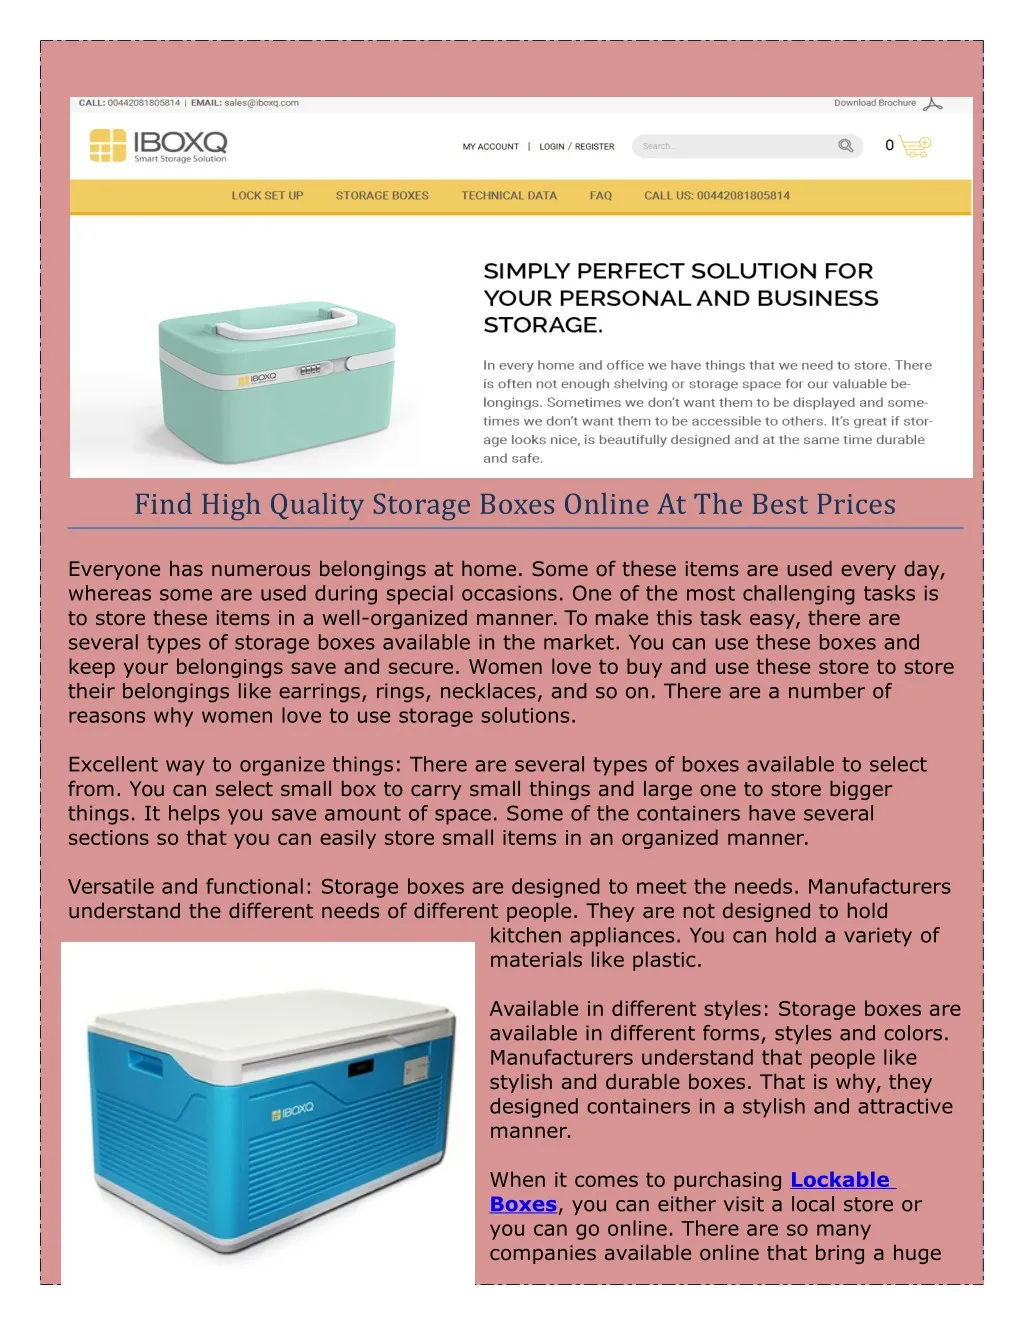 find high quality storage boxes online